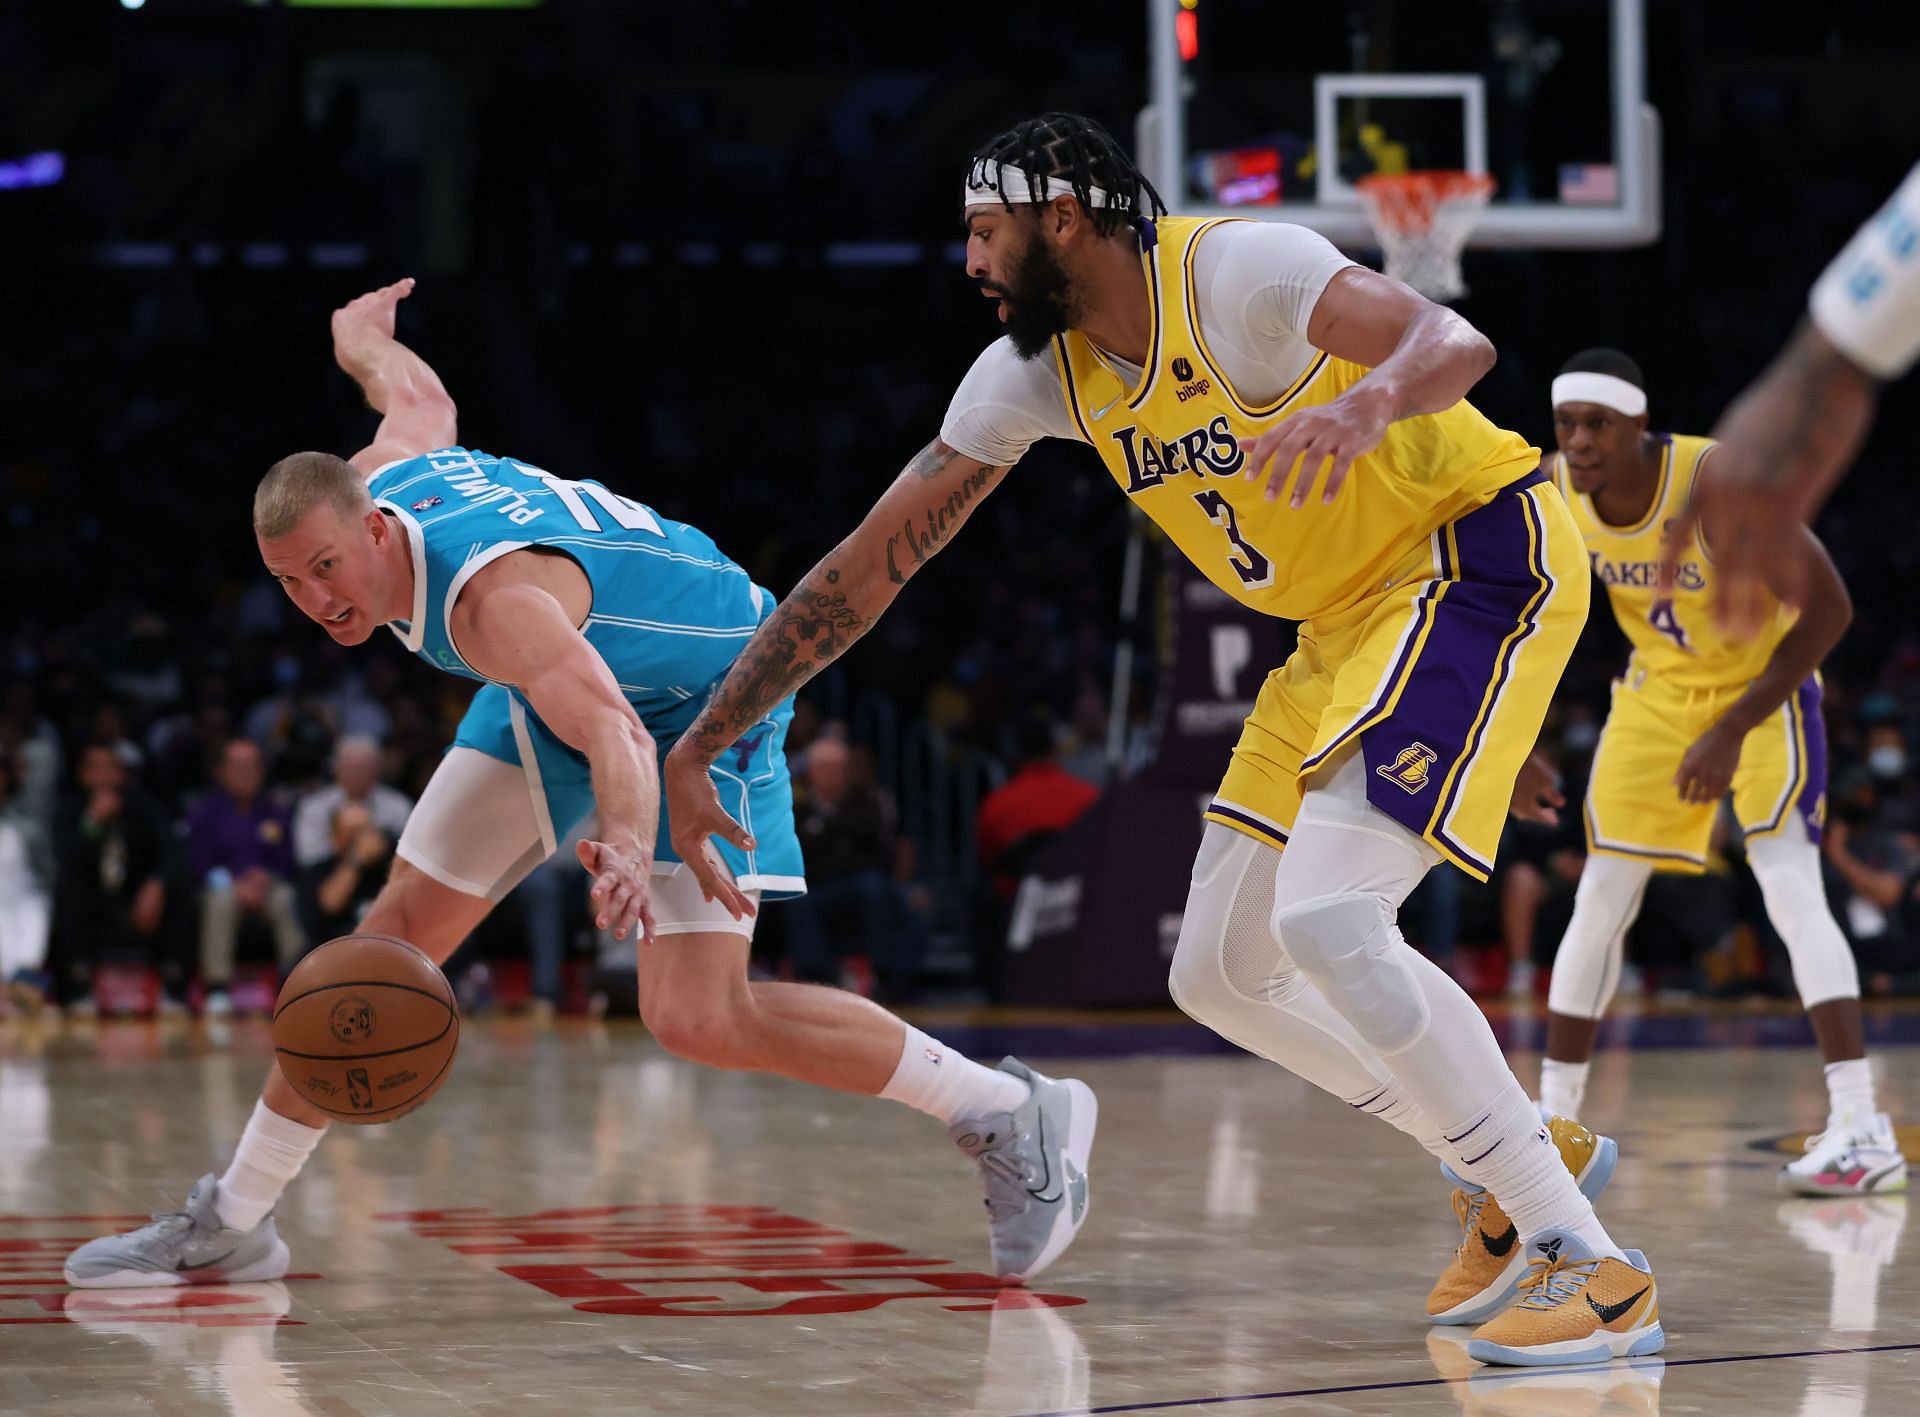 The Charlotte Hornets will host the LA Lakers on January 28th